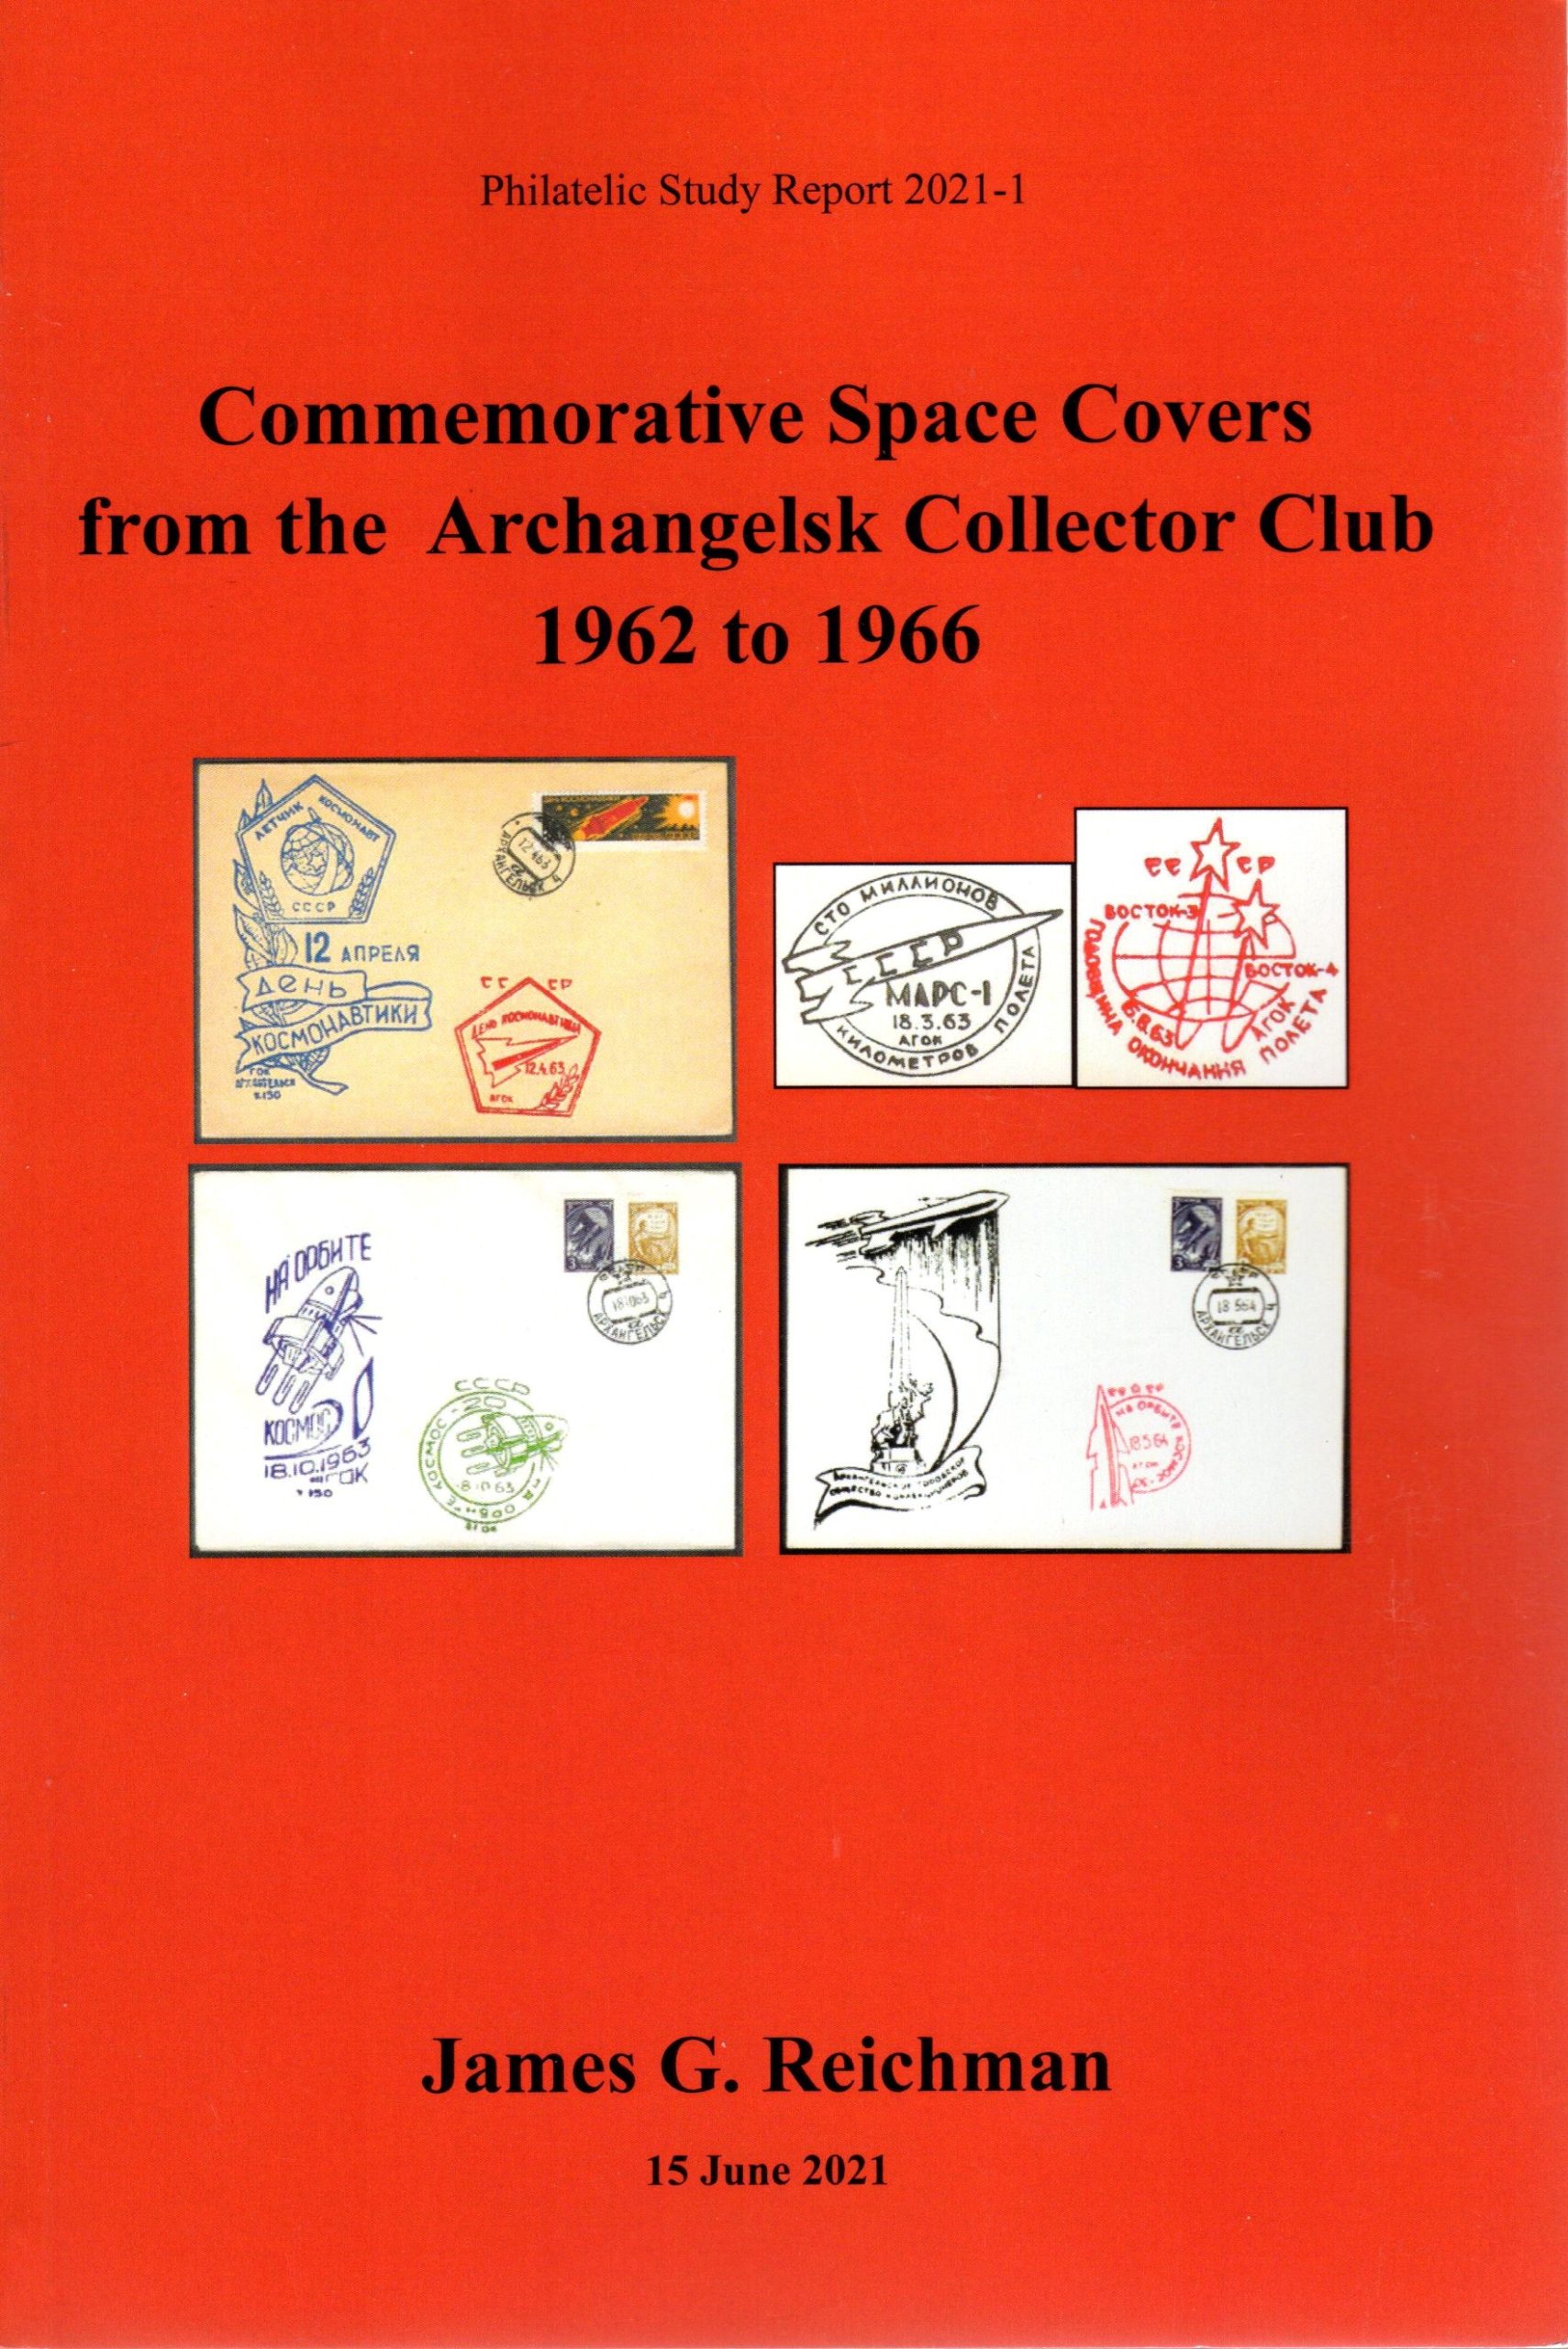 Commemorative Space Covers from the Archangelsk Collector Club 1962-1966 (305 pgs) CD-ROM included